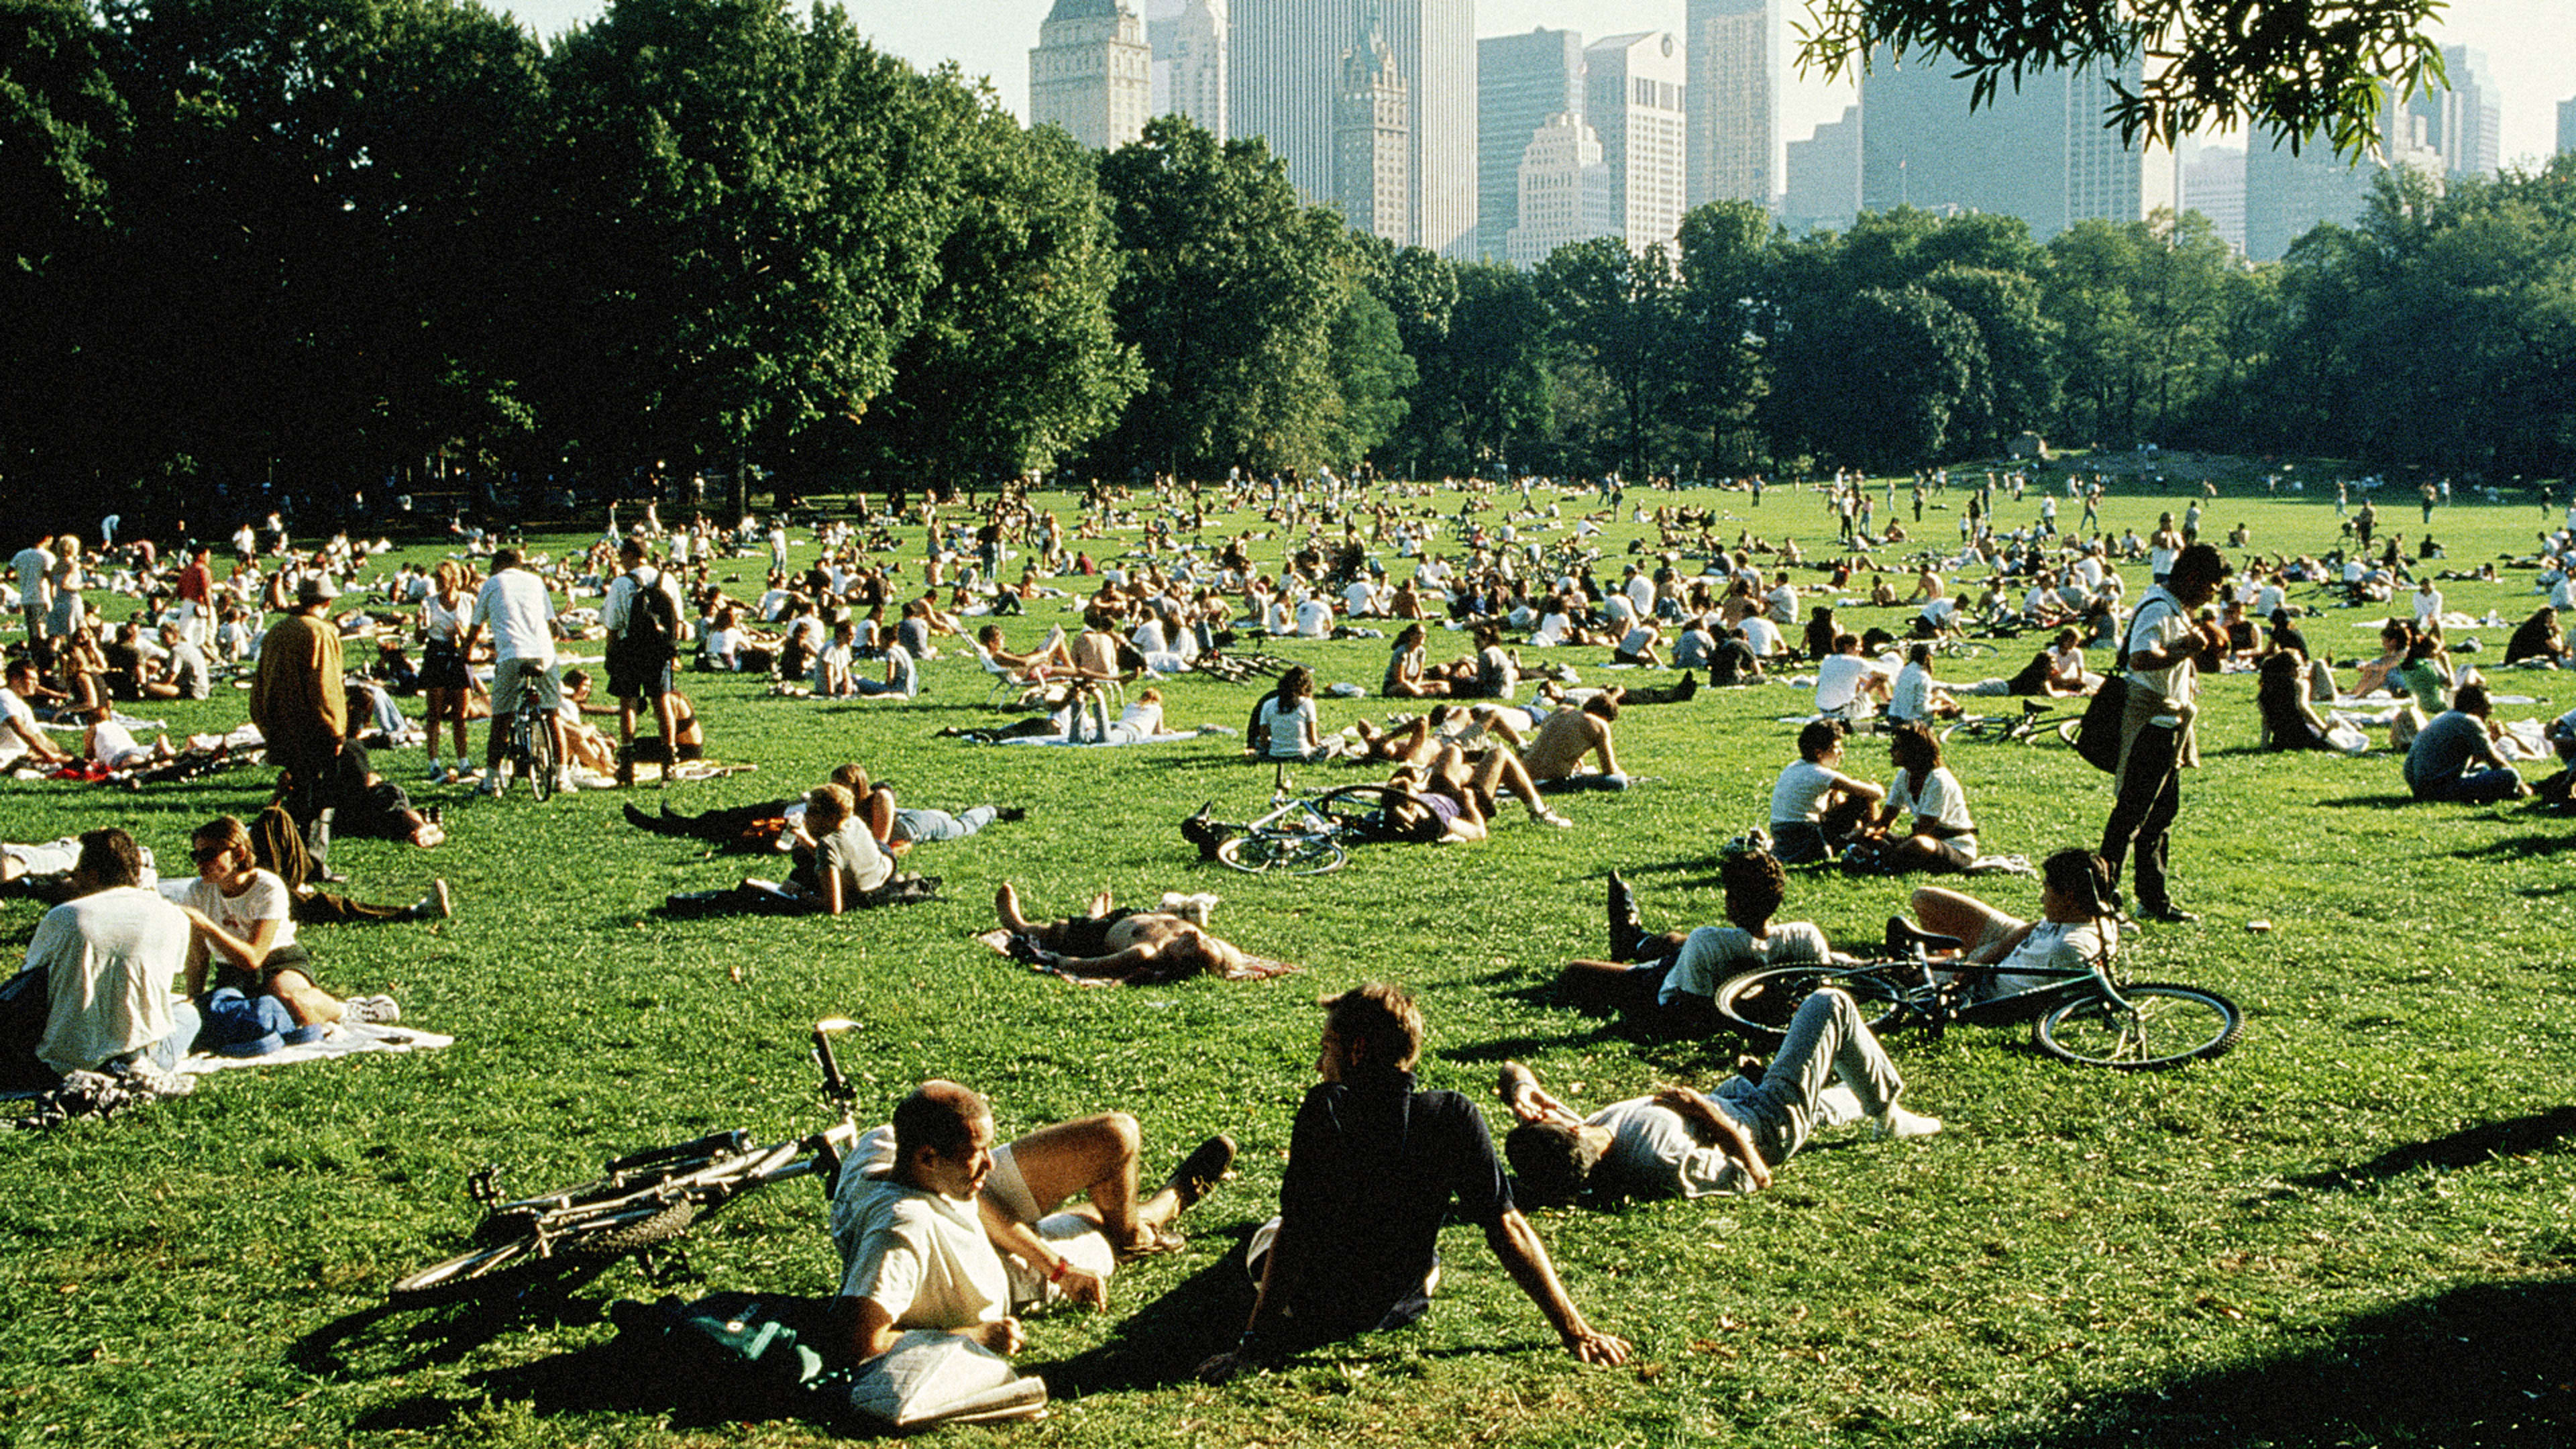 Do Green Spaces In Cities Help Close “Well-Being Gaps” Between Rich And Poor?